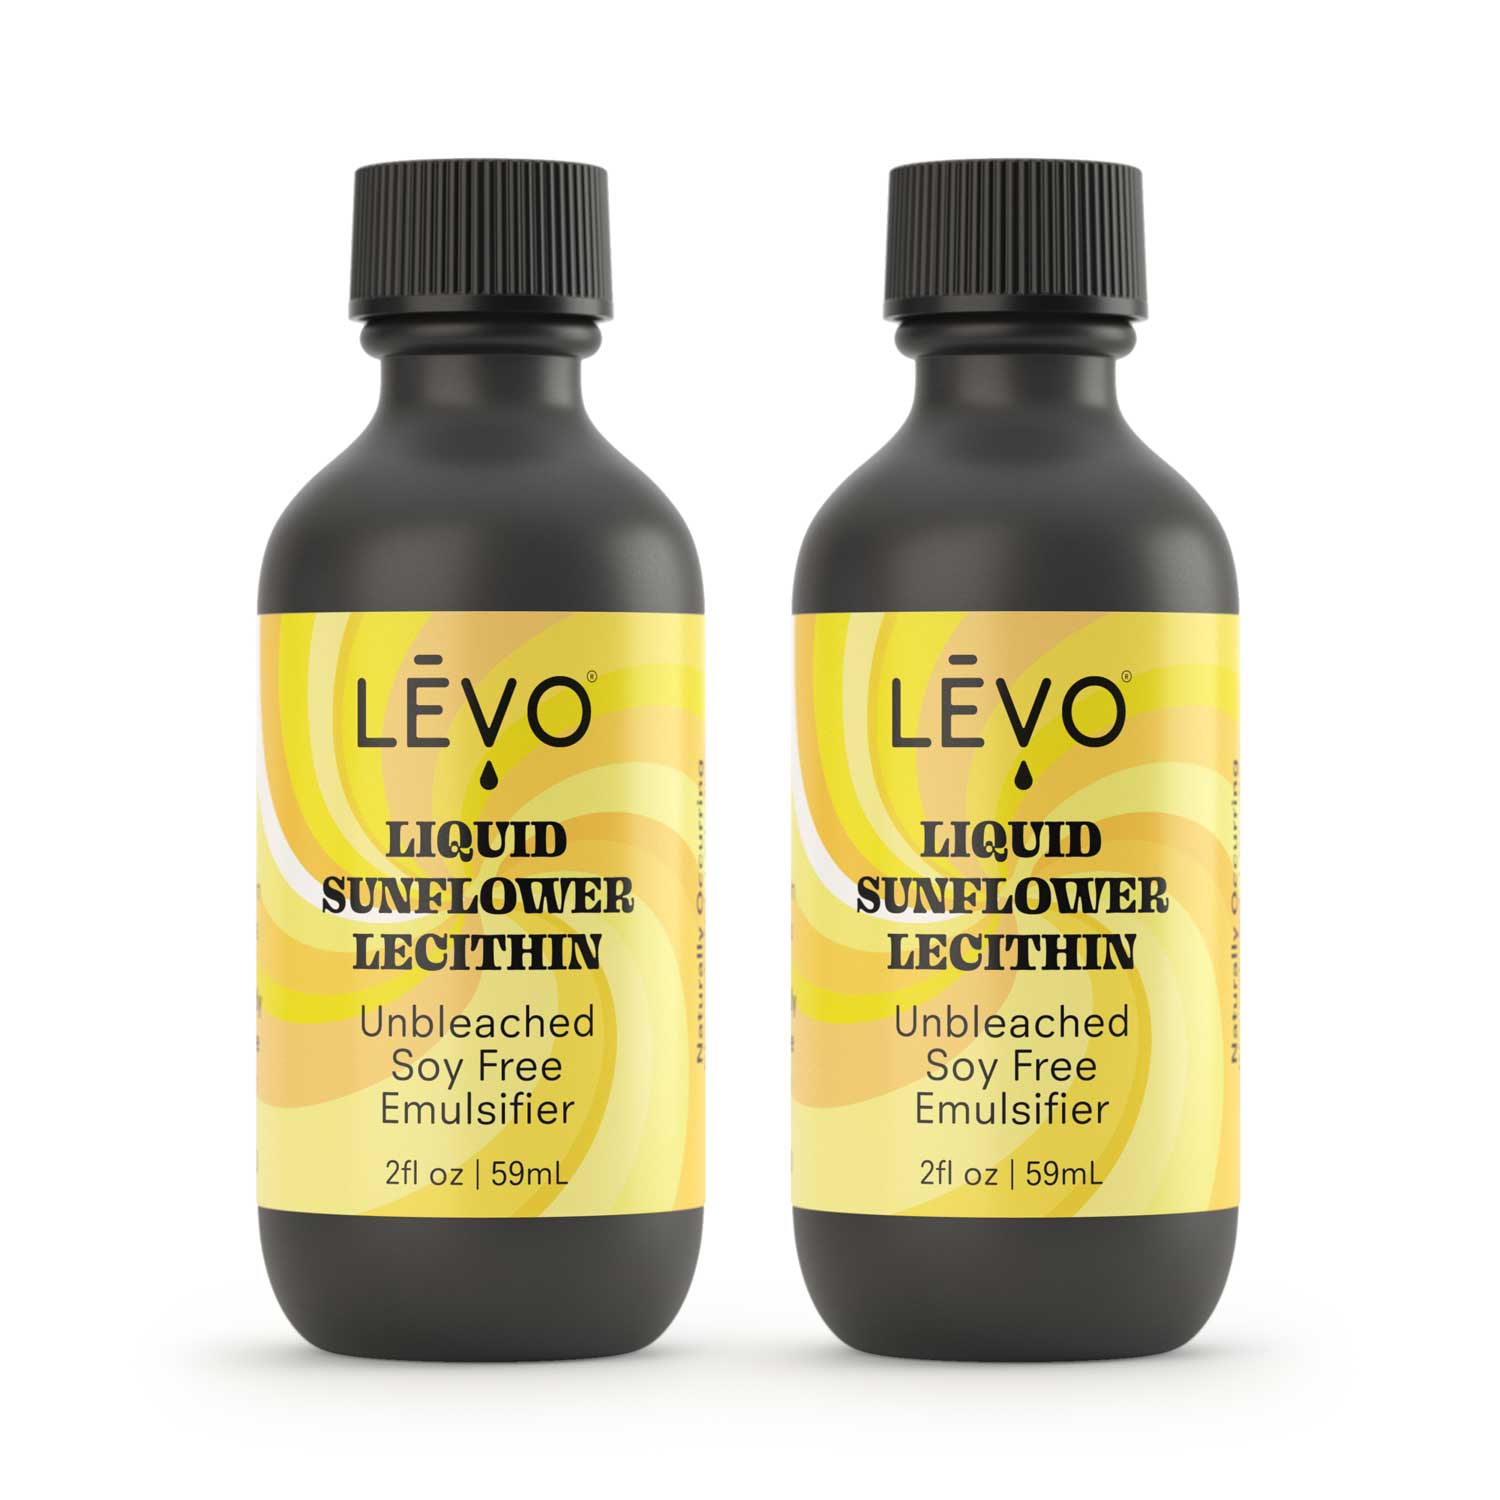 Lecithin works when making chocolates or baked goods because it binds the infused oil to your water-based ingredients.